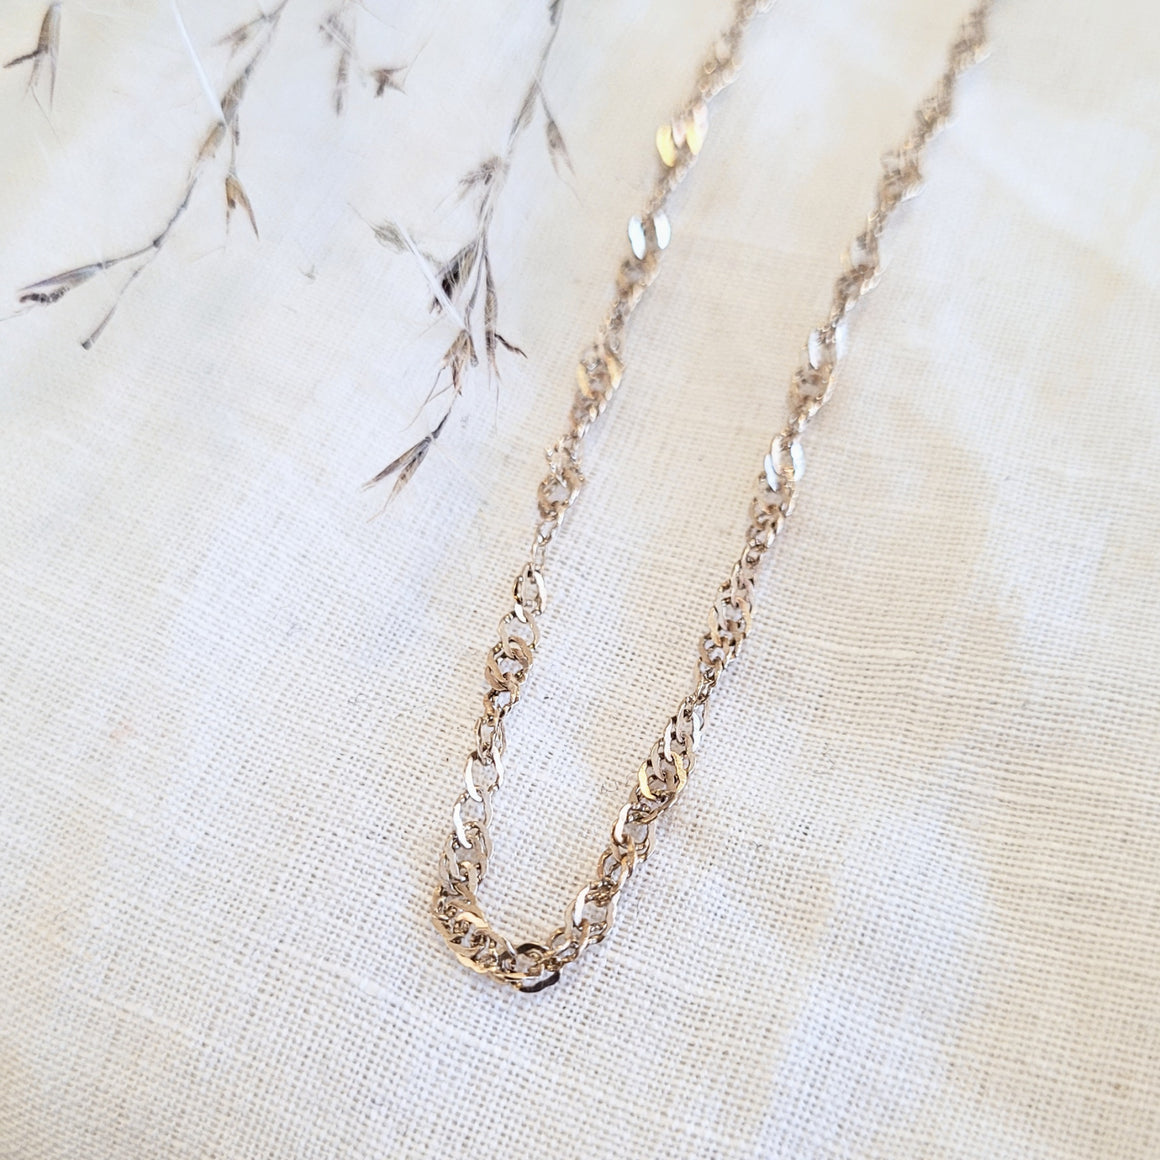 10k yellow gold twisted Singapore link chain